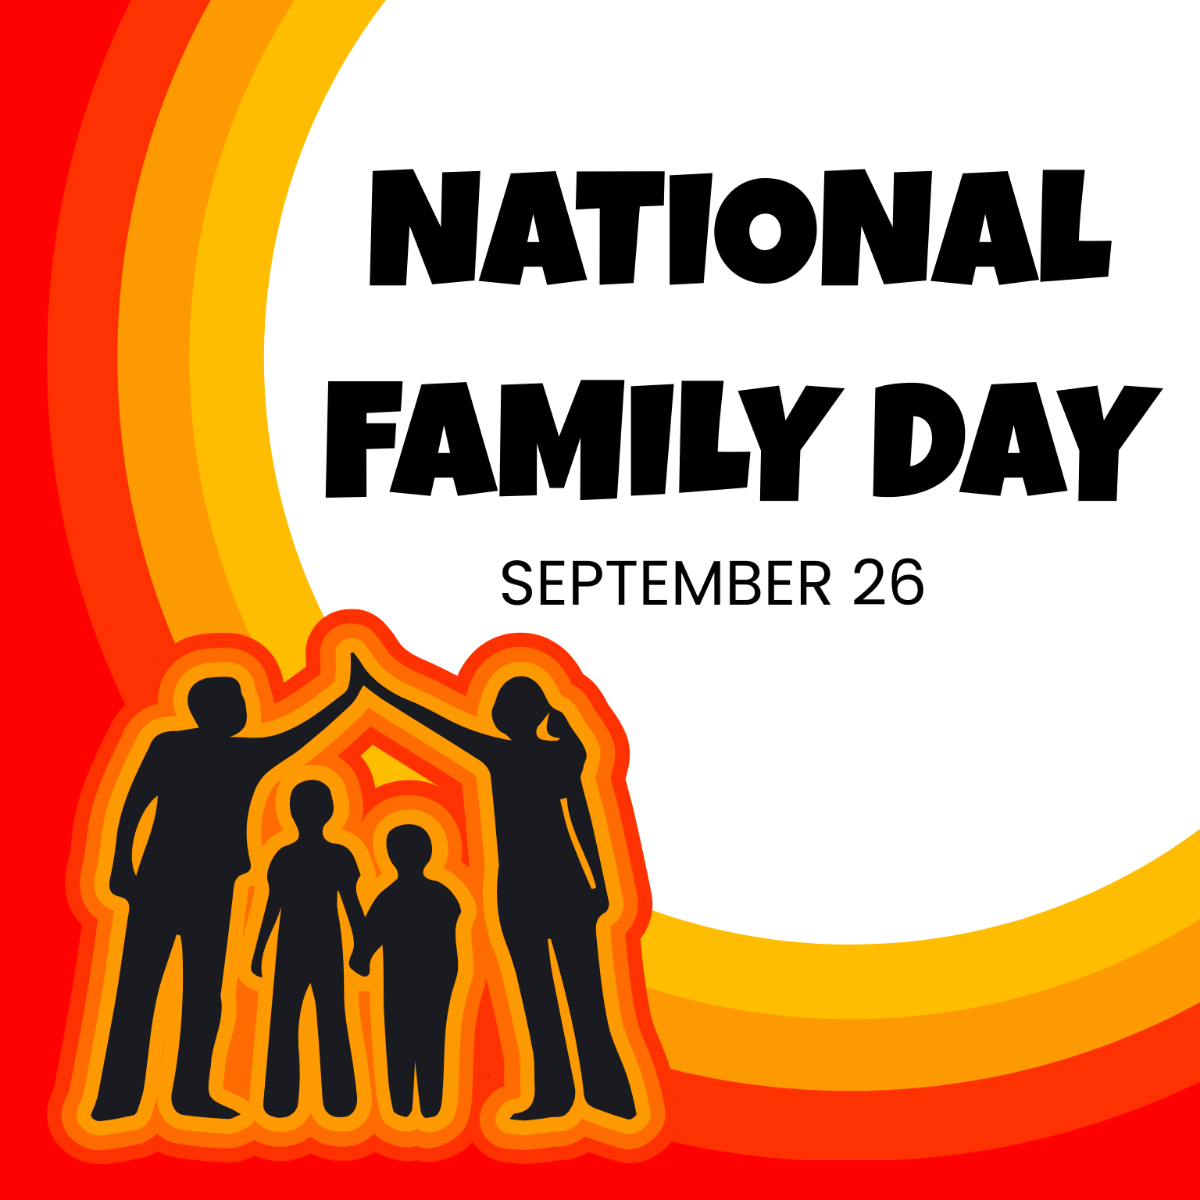 Free National Family Day Flyer Vector Template